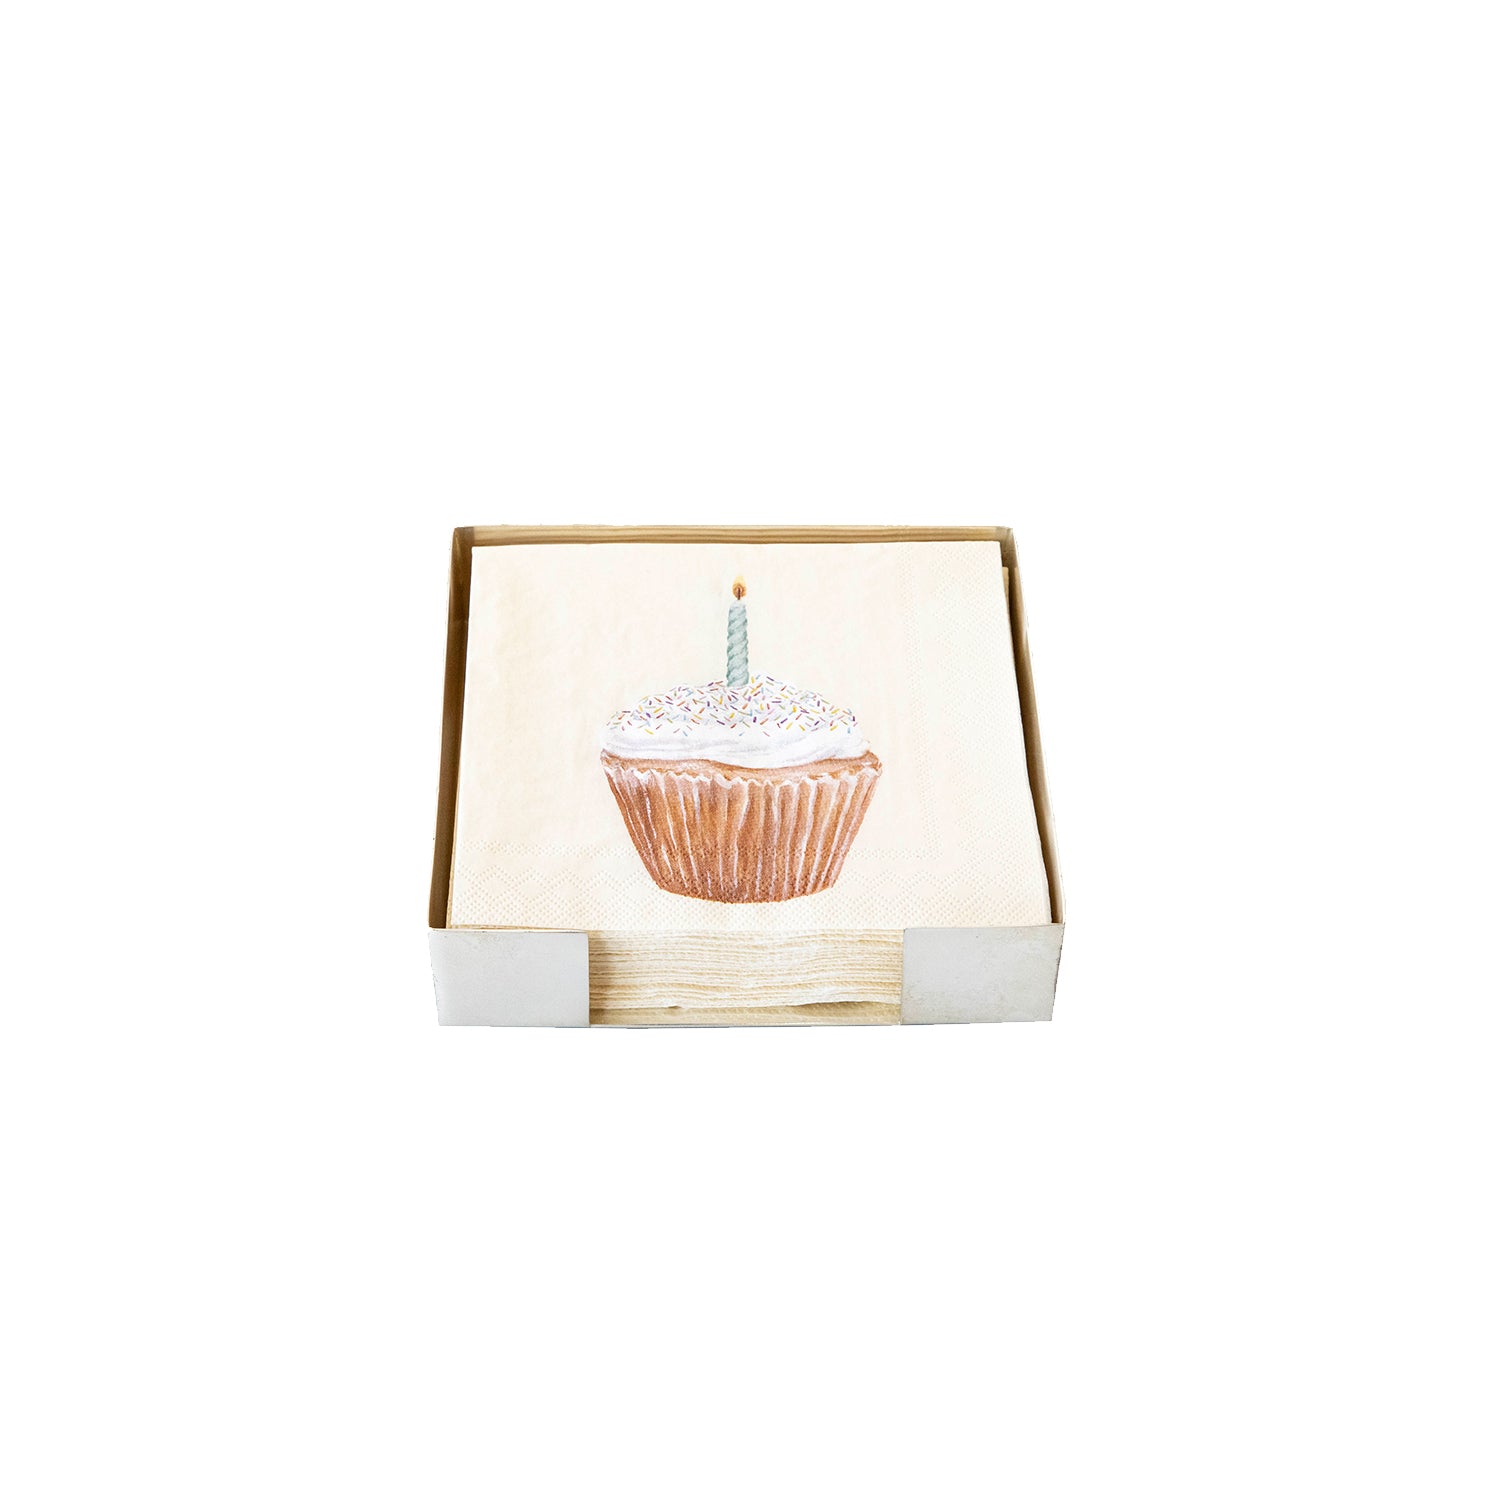 A Silver Cocktail Napkin Holder containing cupcake napkins on a white table.